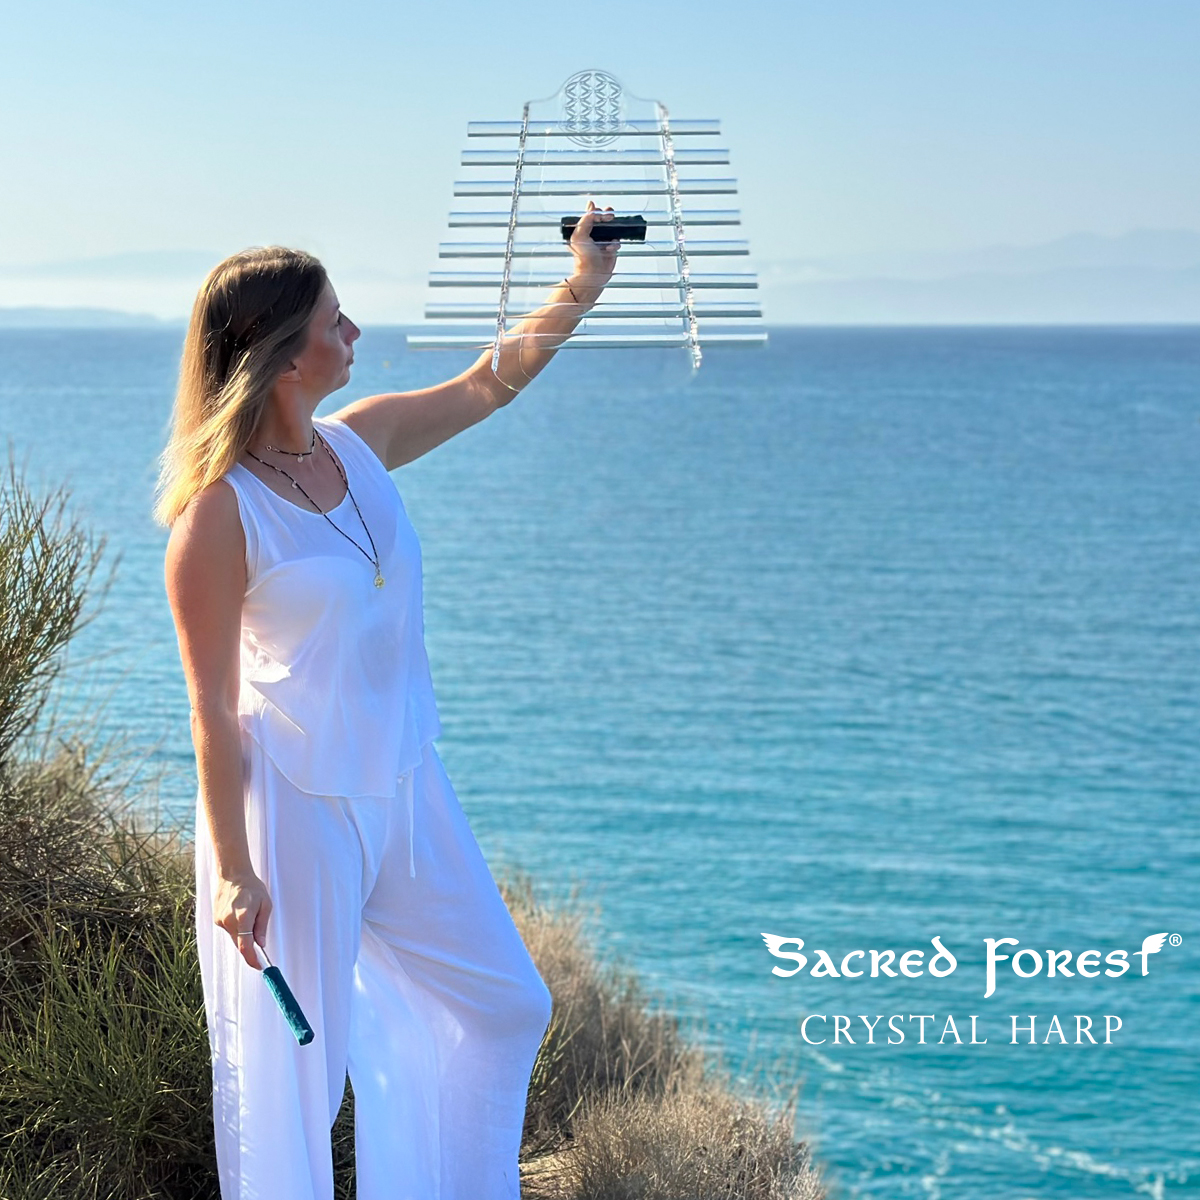 Natalia standing with Sacred Forest Crystal Harp at beautiful, stuning, turquoise seashore